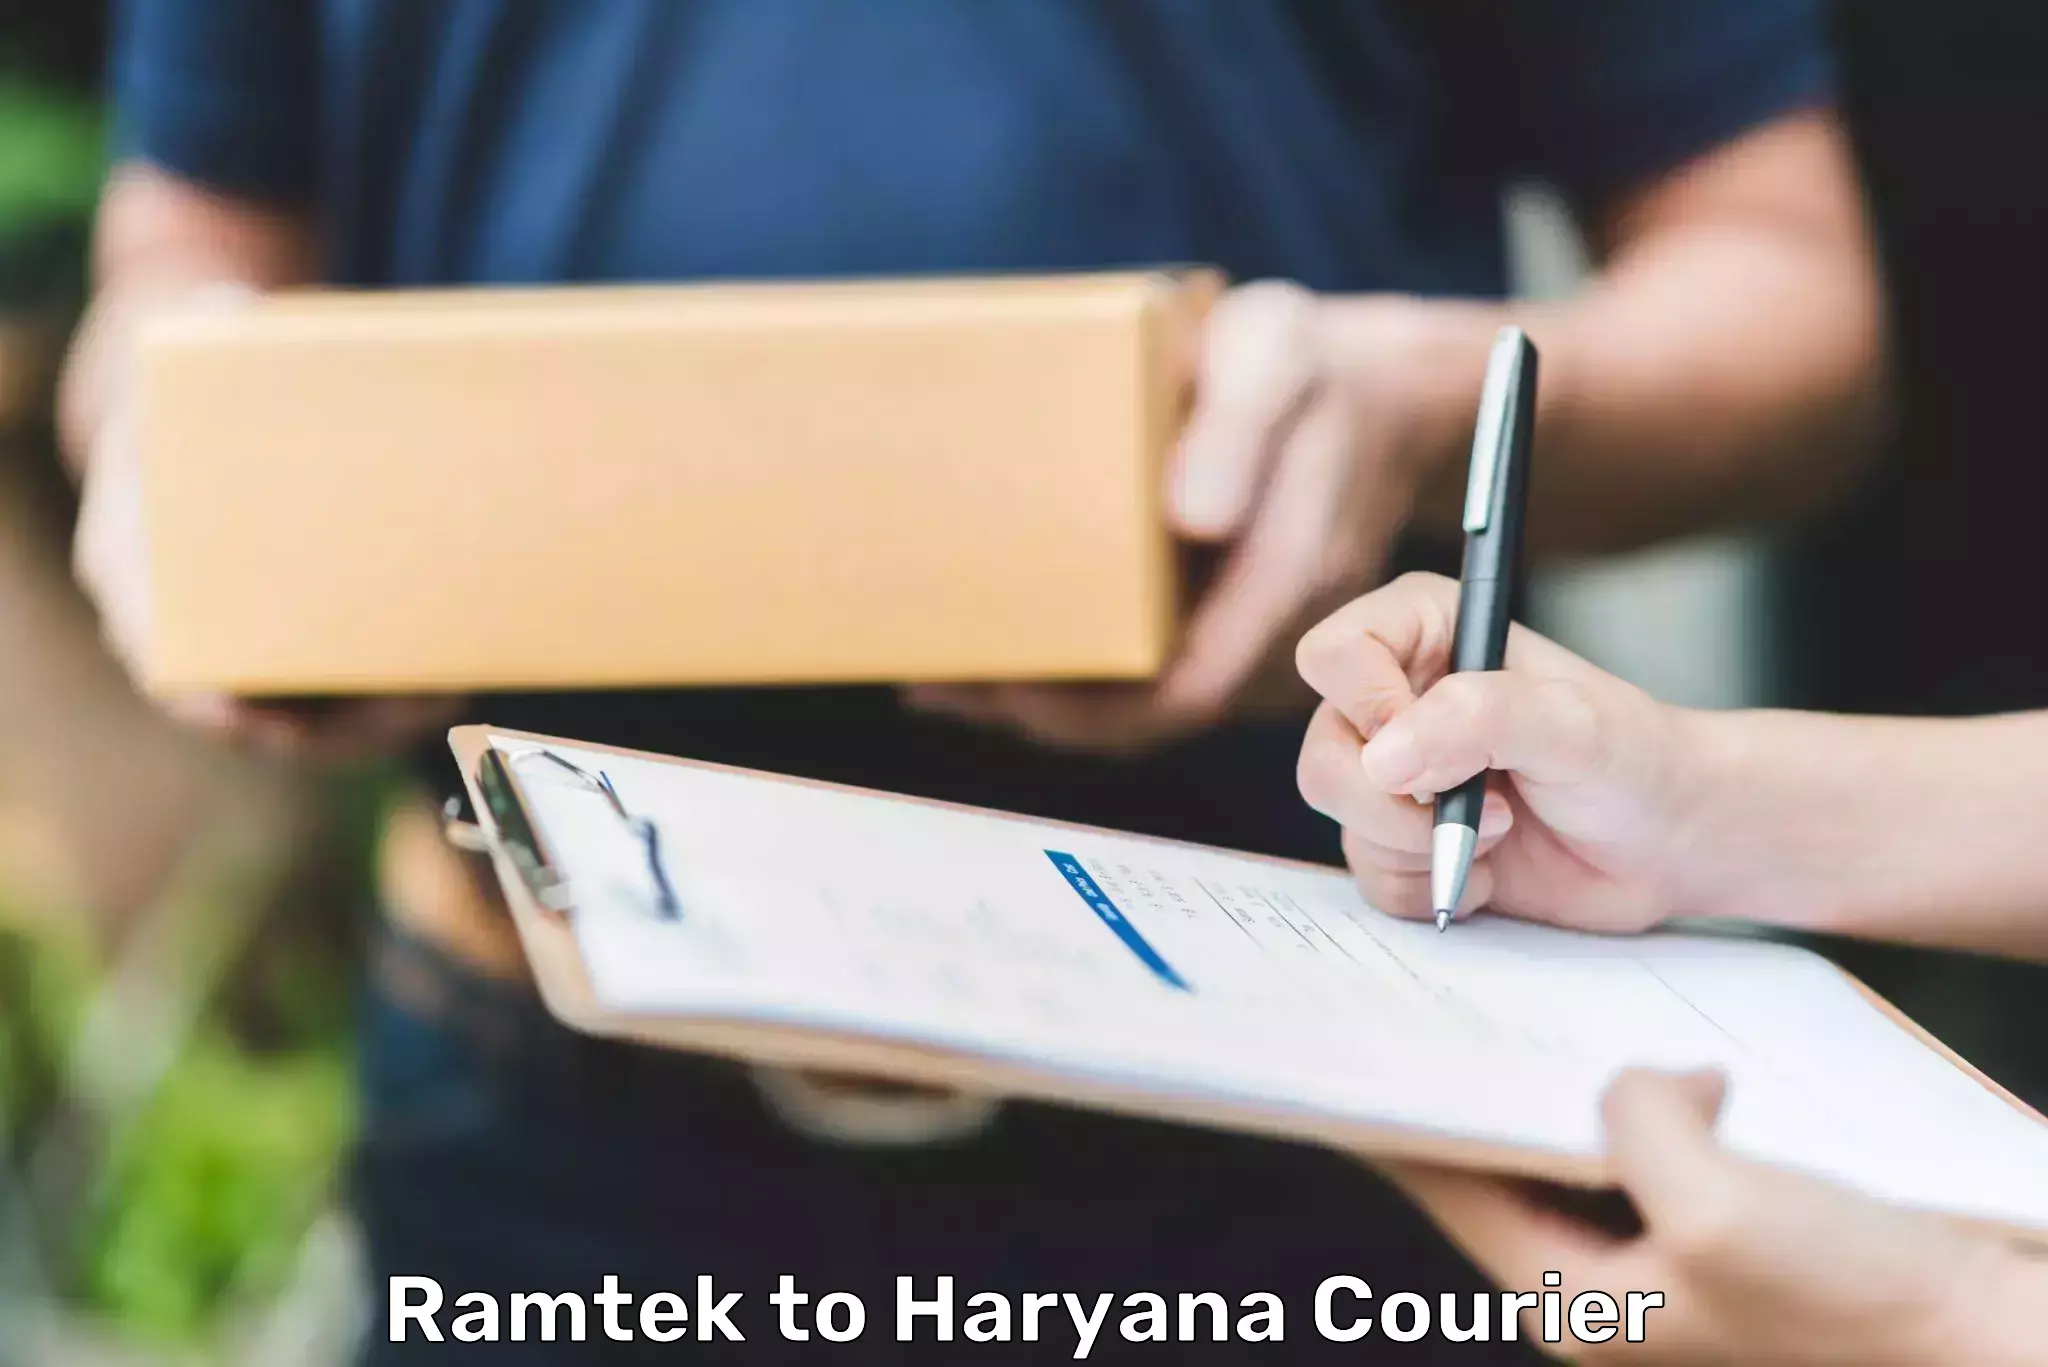 Residential courier service Ramtek to Chaudhary Charan Singh Haryana Agricultural University Hisar